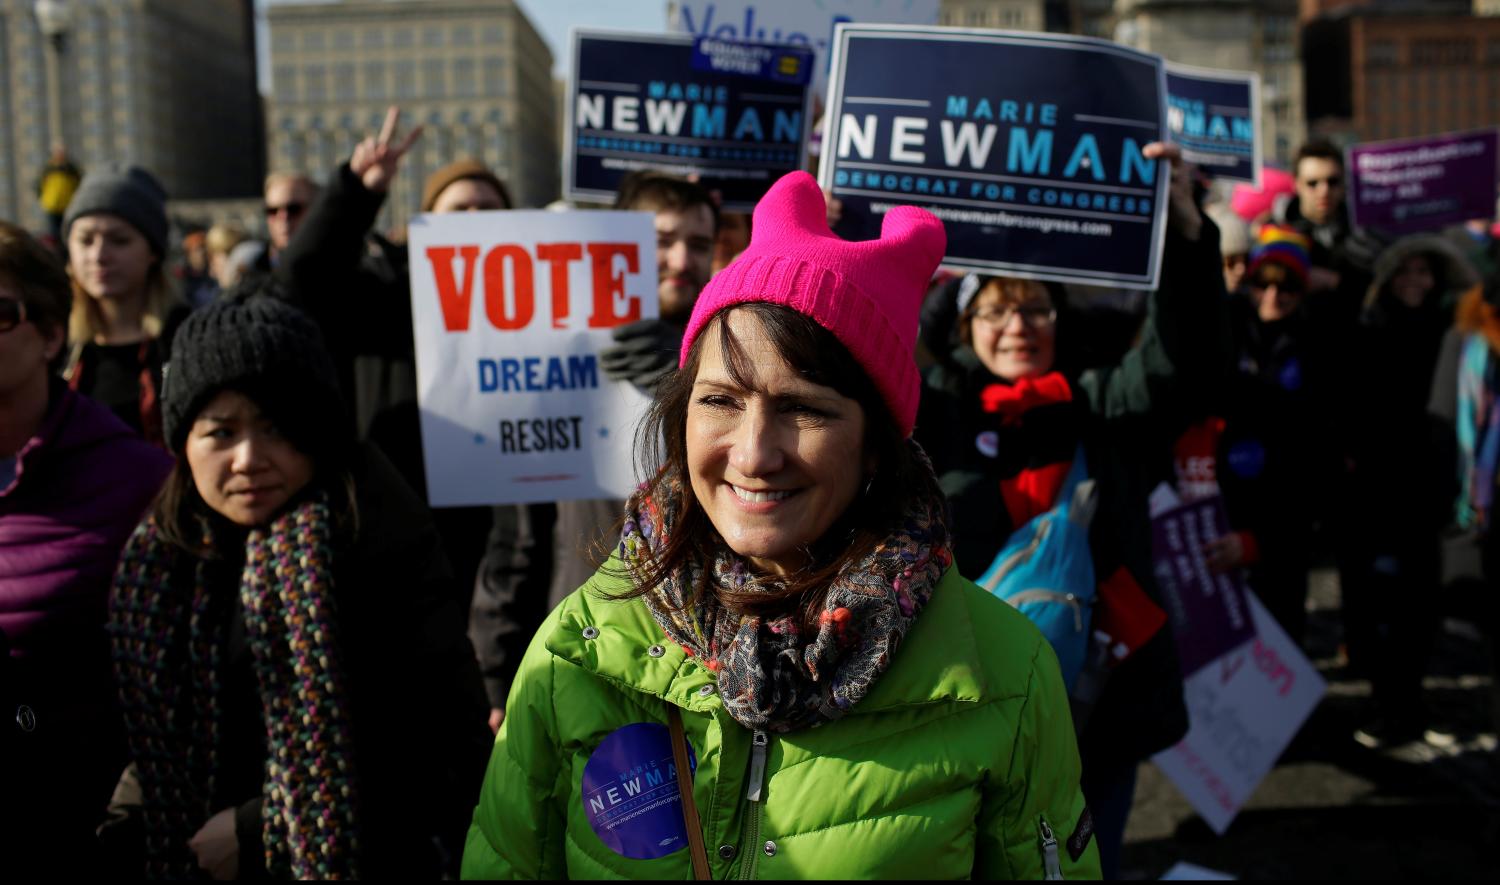 Illinois' 3rd Congressional District candidate for Congress, Marie Newman, attends the Women's March in Chicago, Illinois.